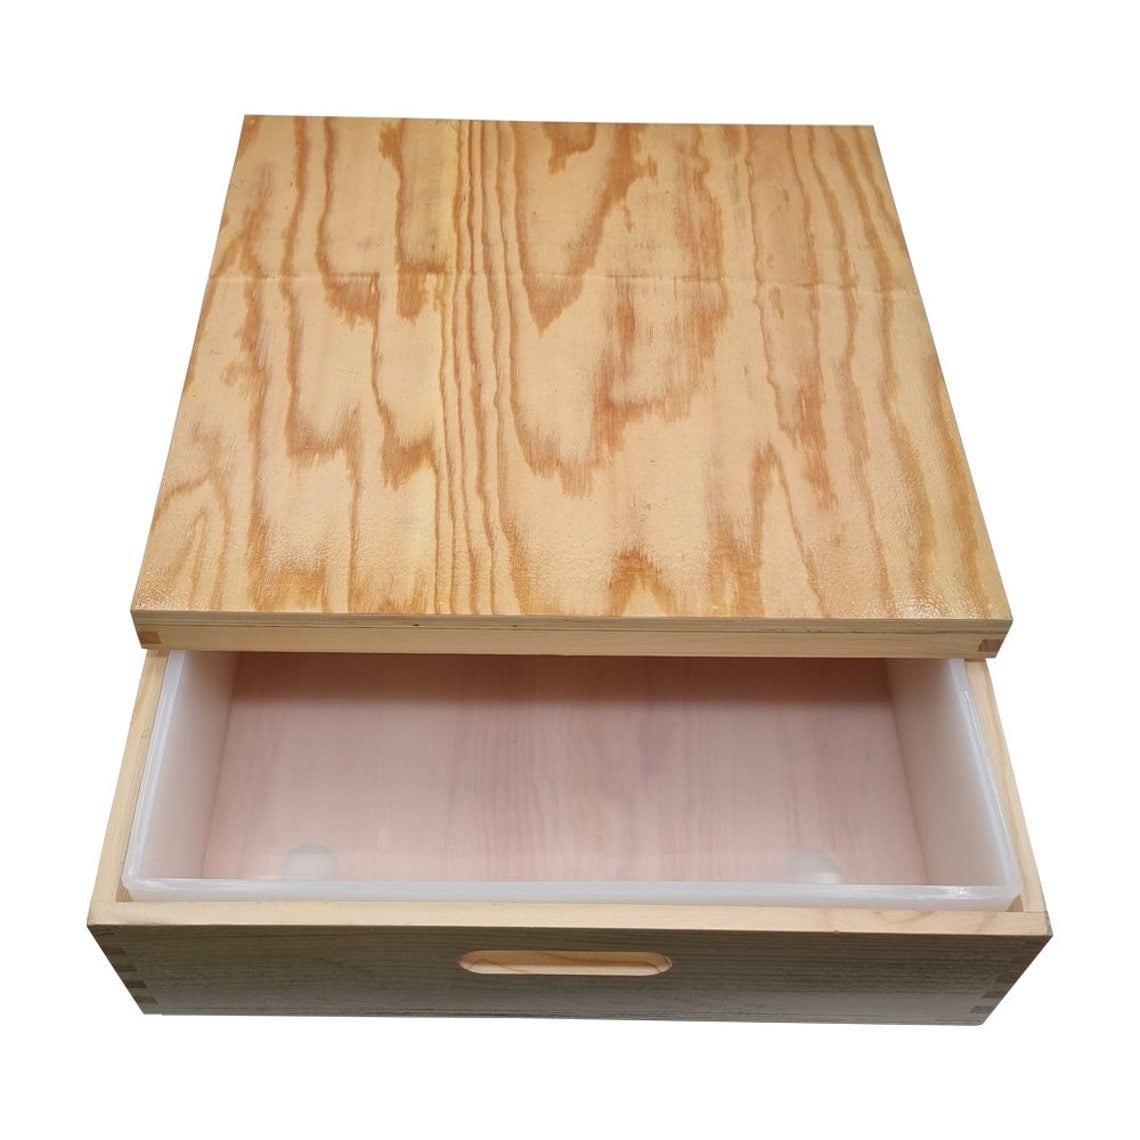 Large-Square-wooden-mould-with-Lid-half-open.jpg